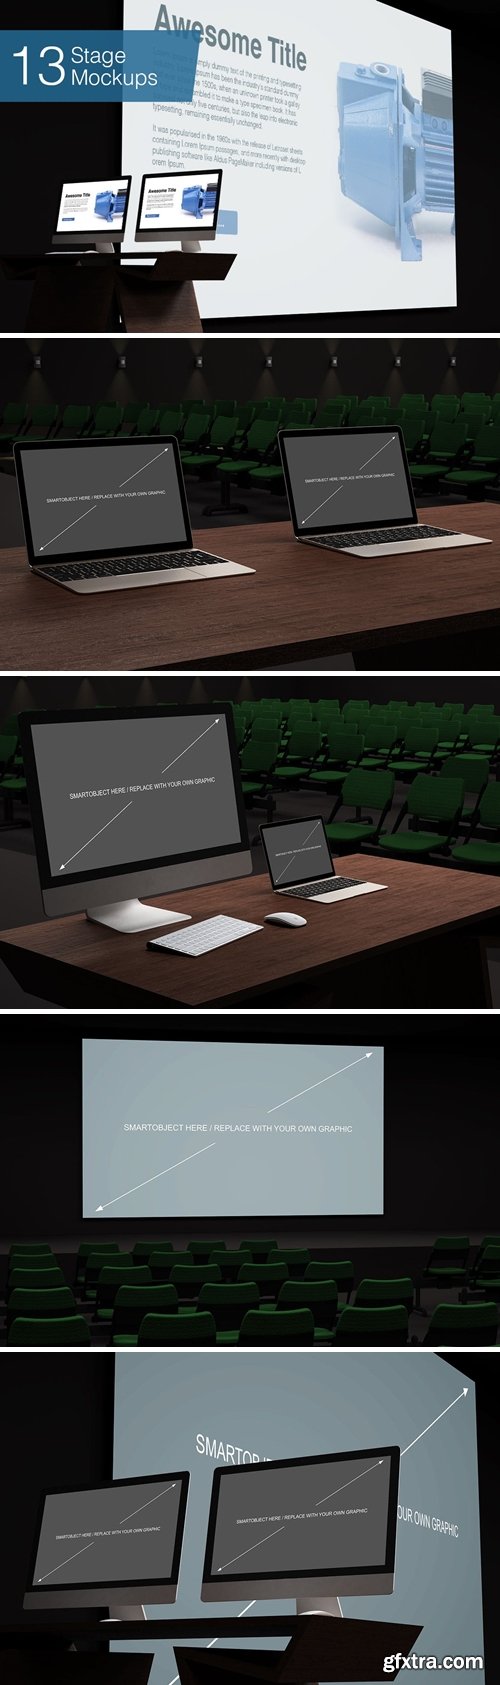 Computer on Stage Mockup - 13 Poses